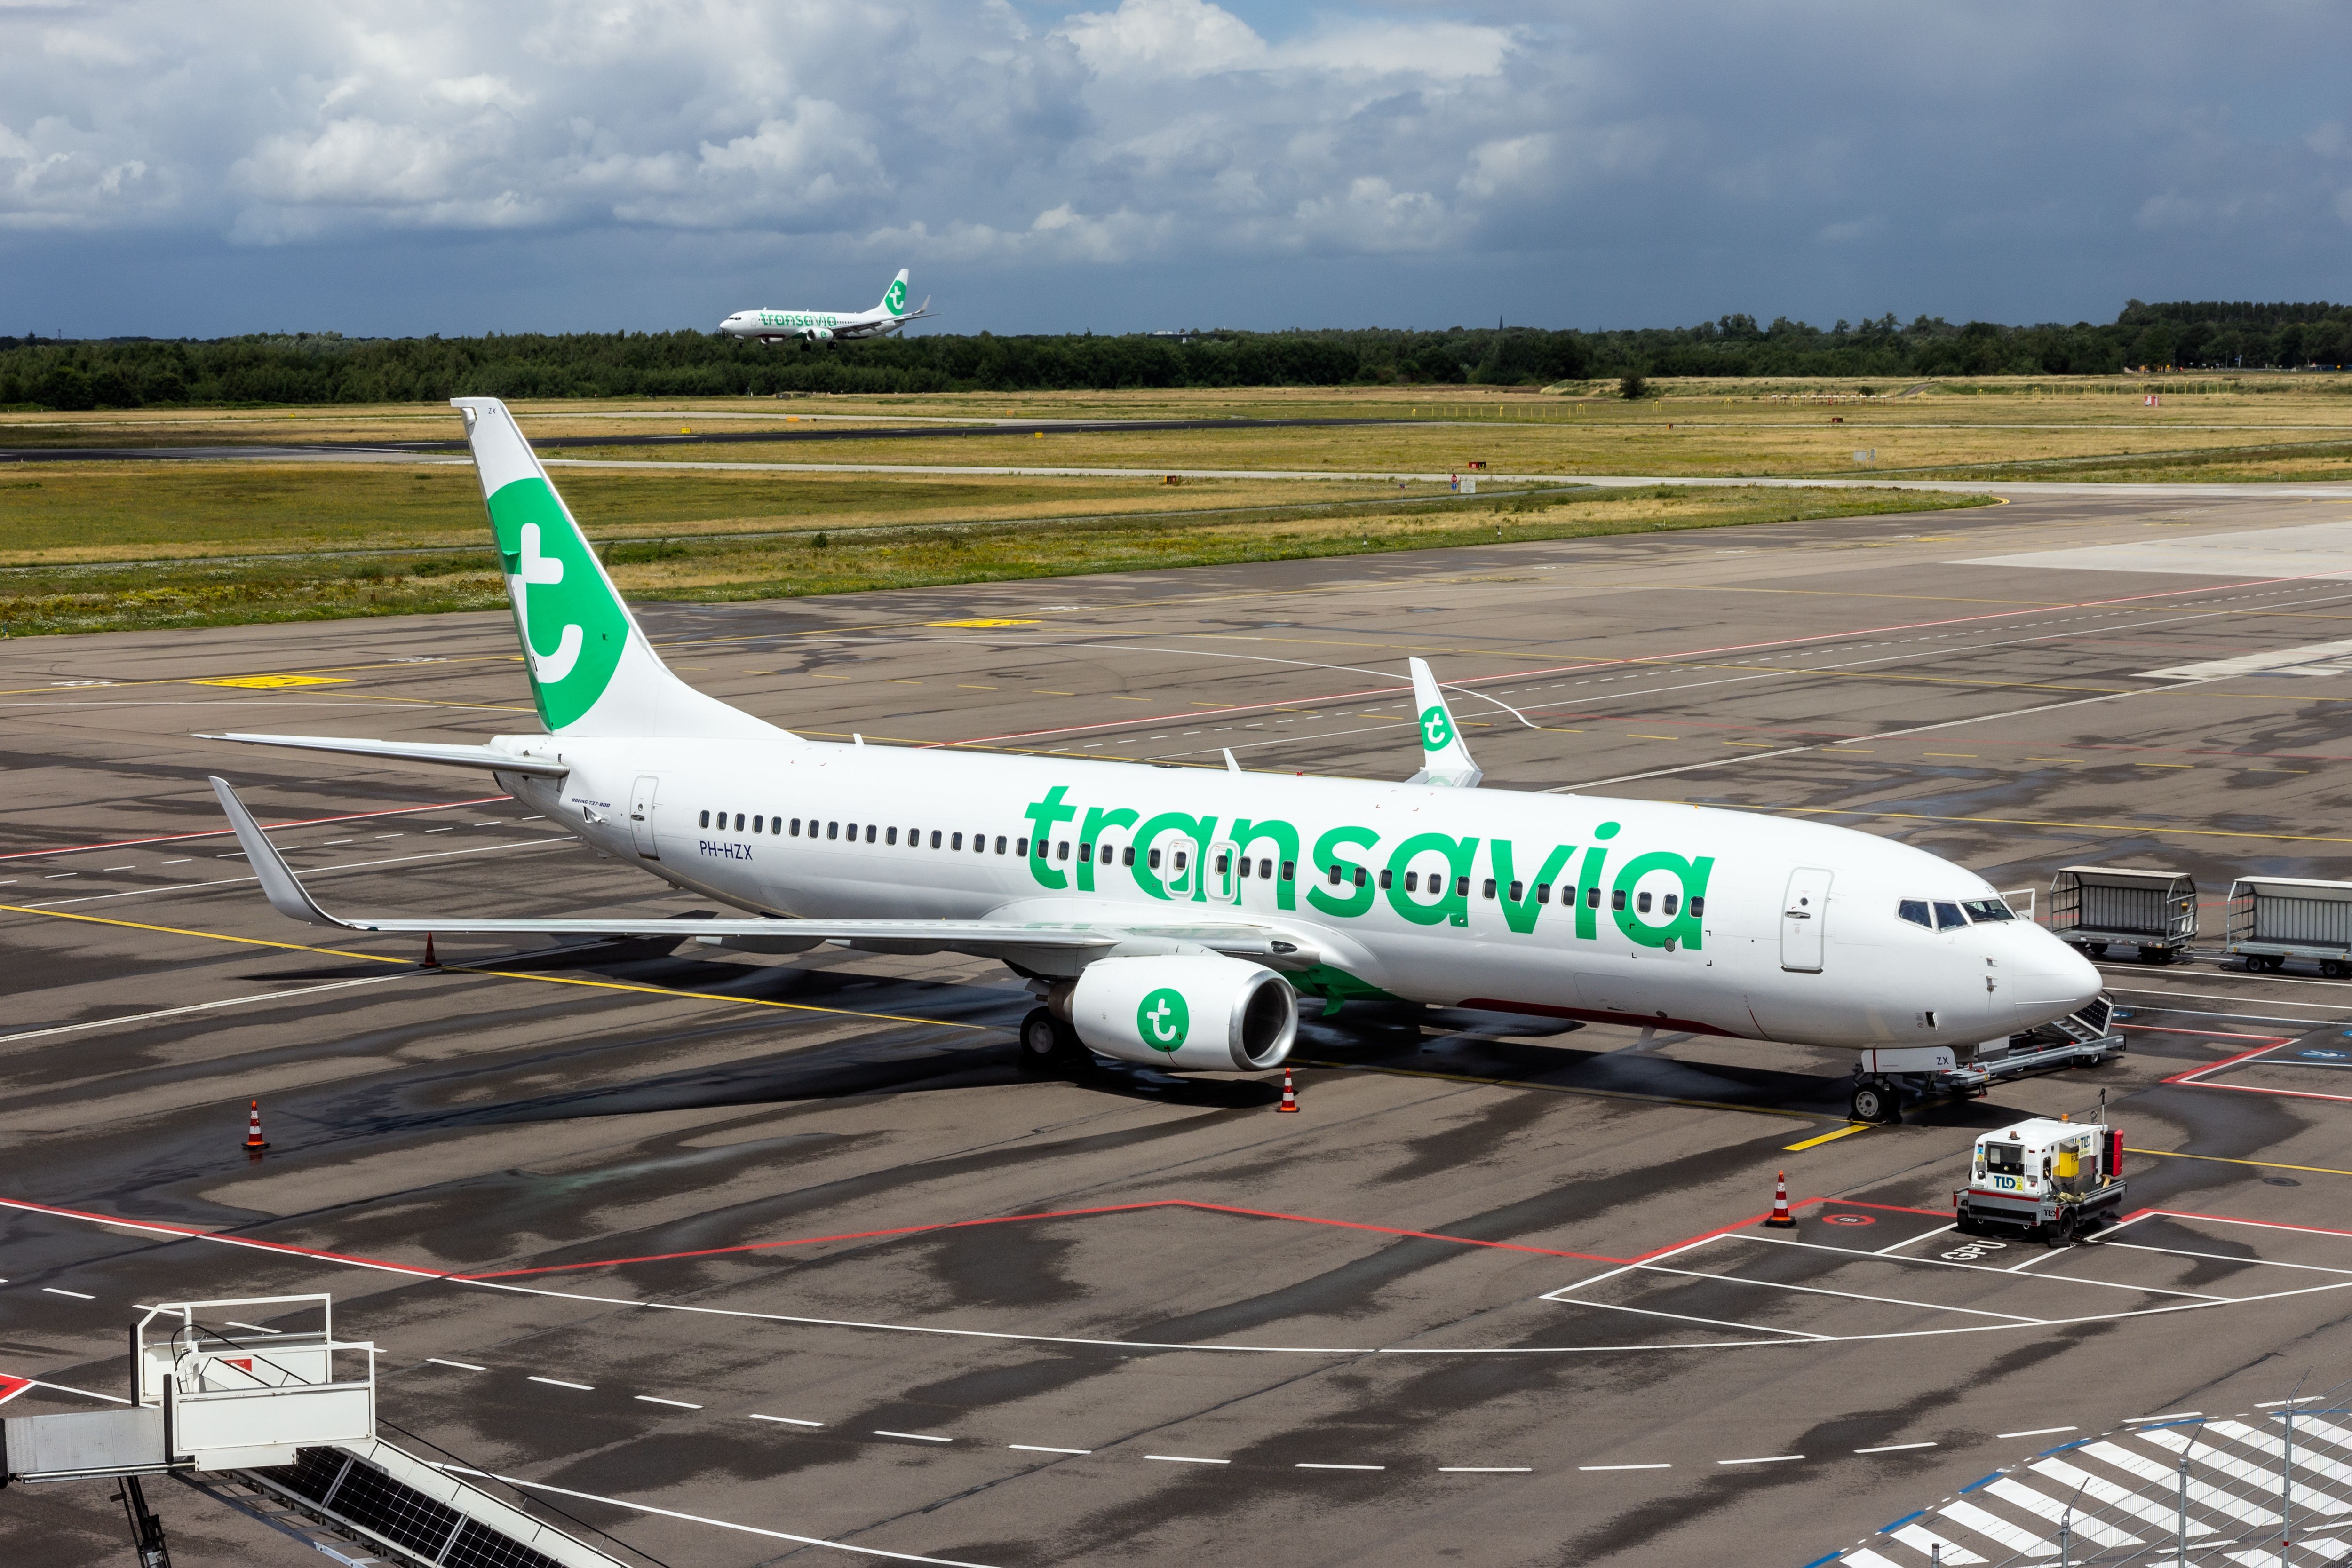 Transavia Boeing 737 jets on the tarmac at Eindhoven Airport